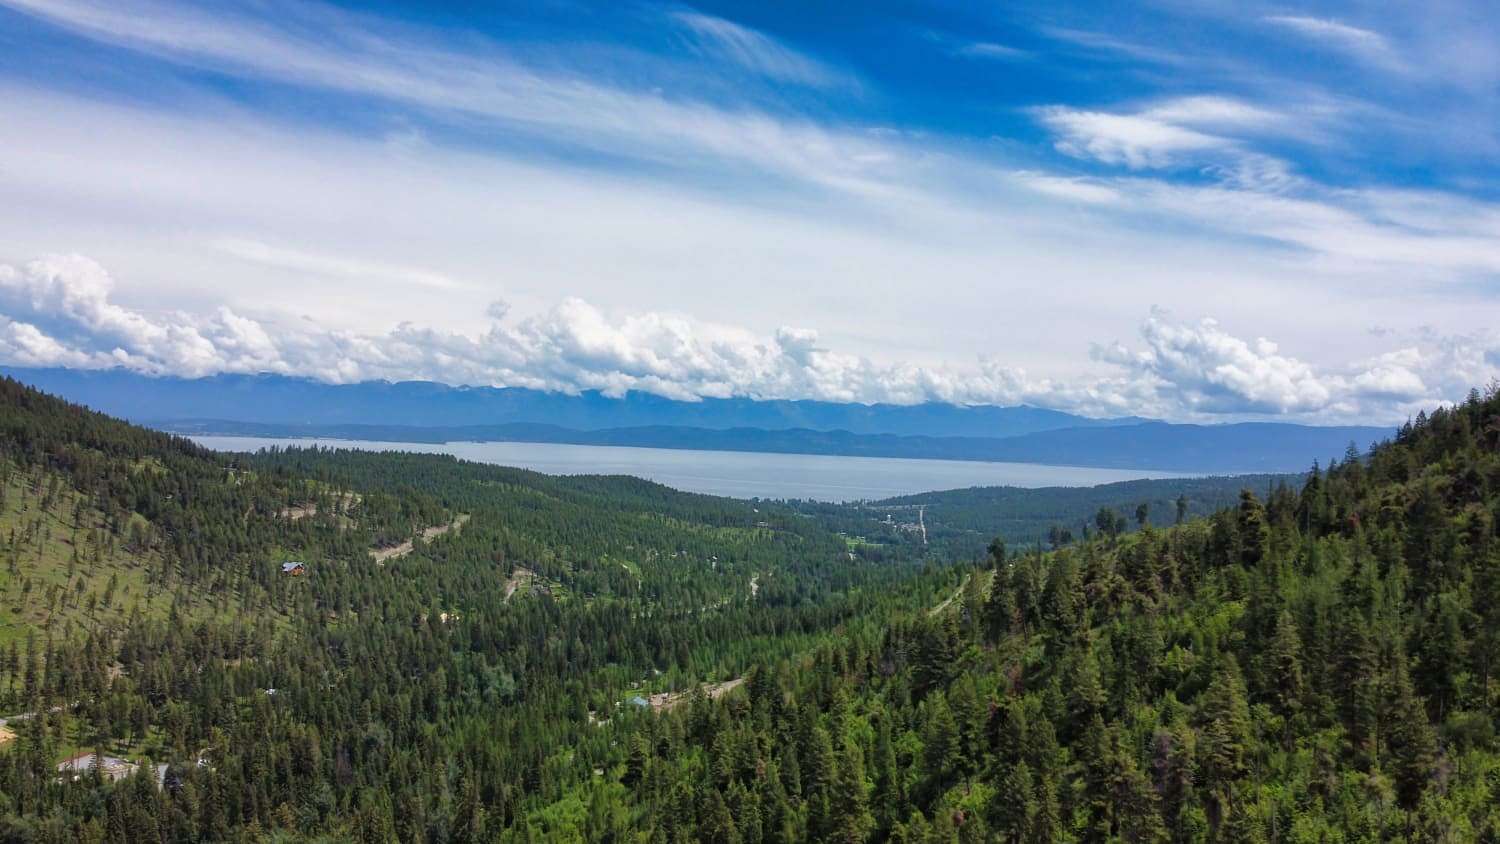 207 Acres of Recreational Land for Sale in Lakeside, Montana